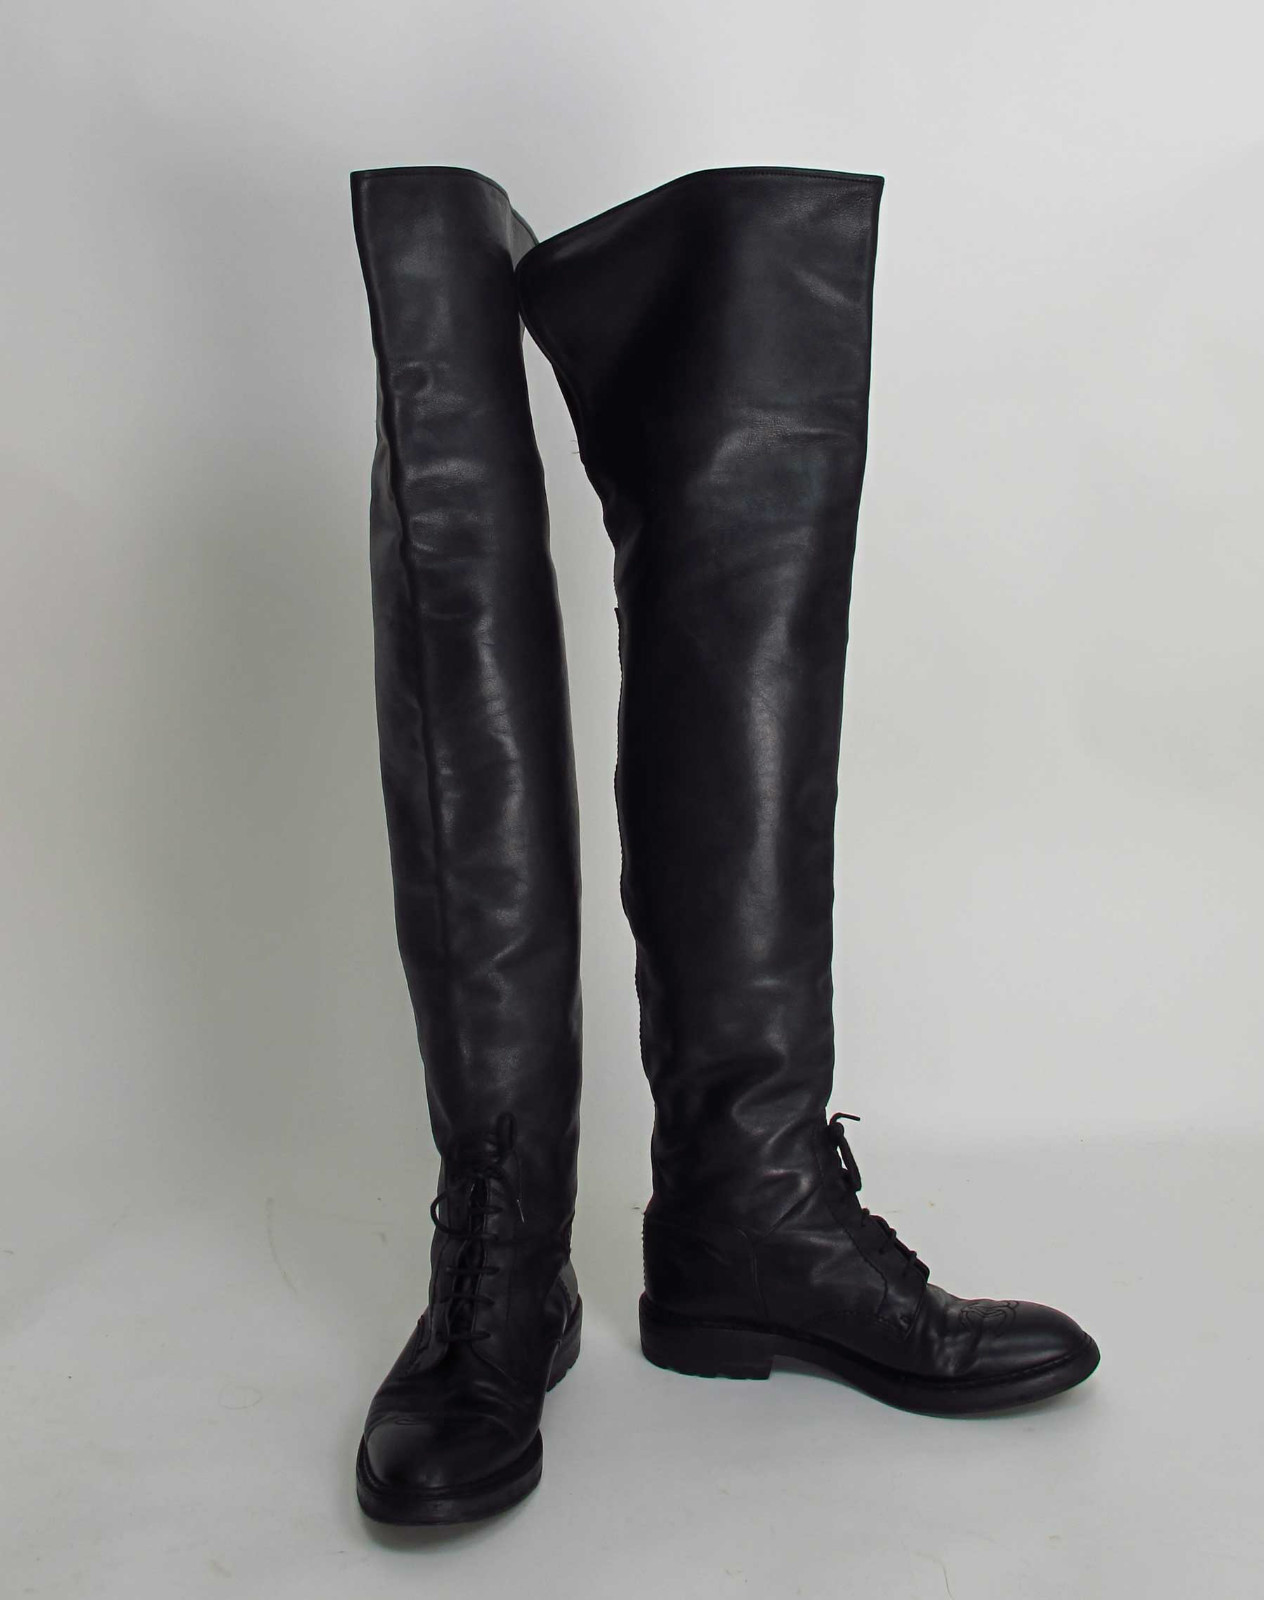 eBay Leather: Very rare Chanel black leather OTK riding boots